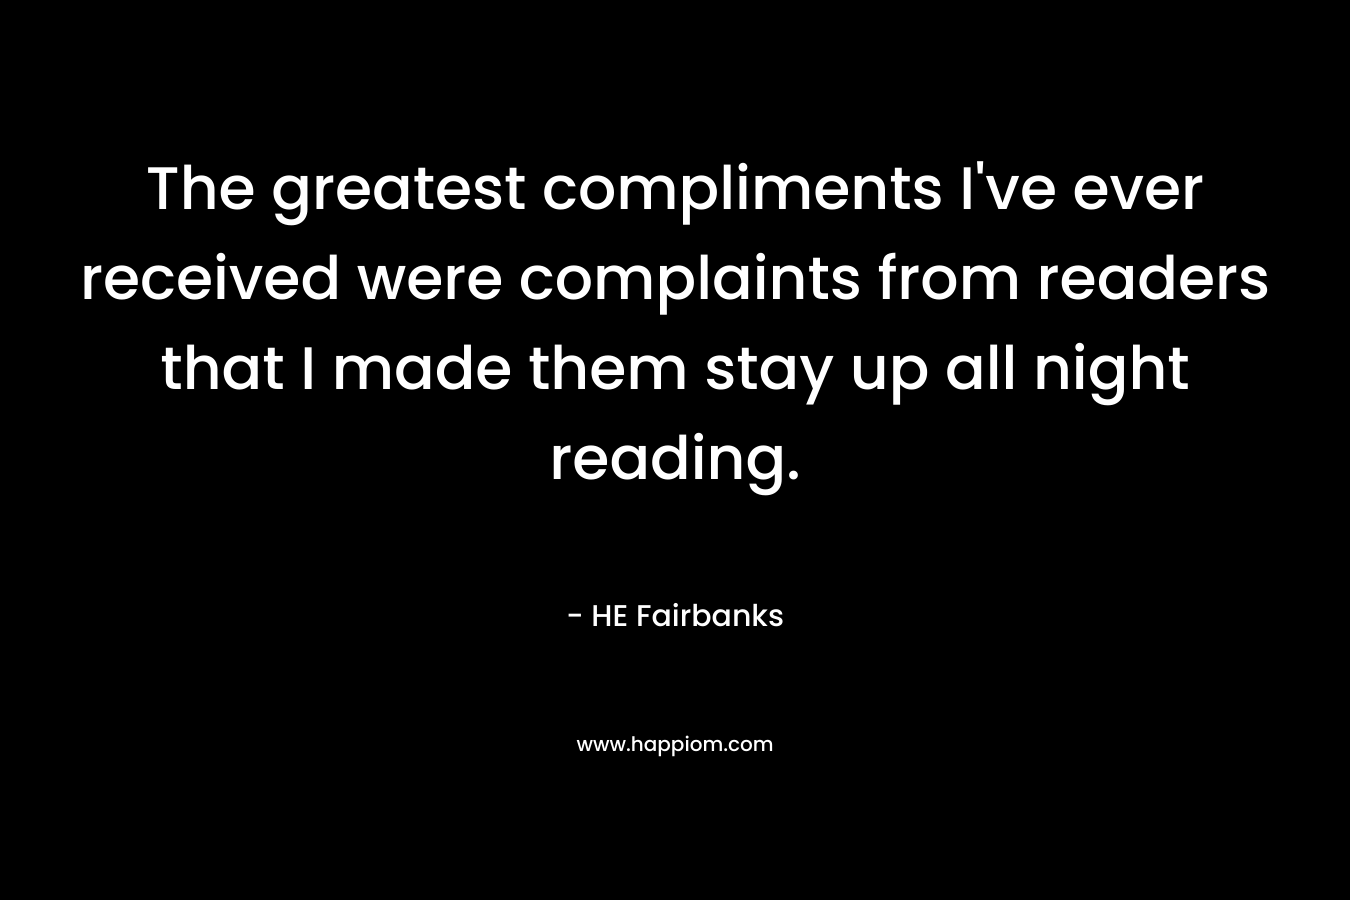 The greatest compliments I've ever received were complaints from readers that I made them stay up all night reading.